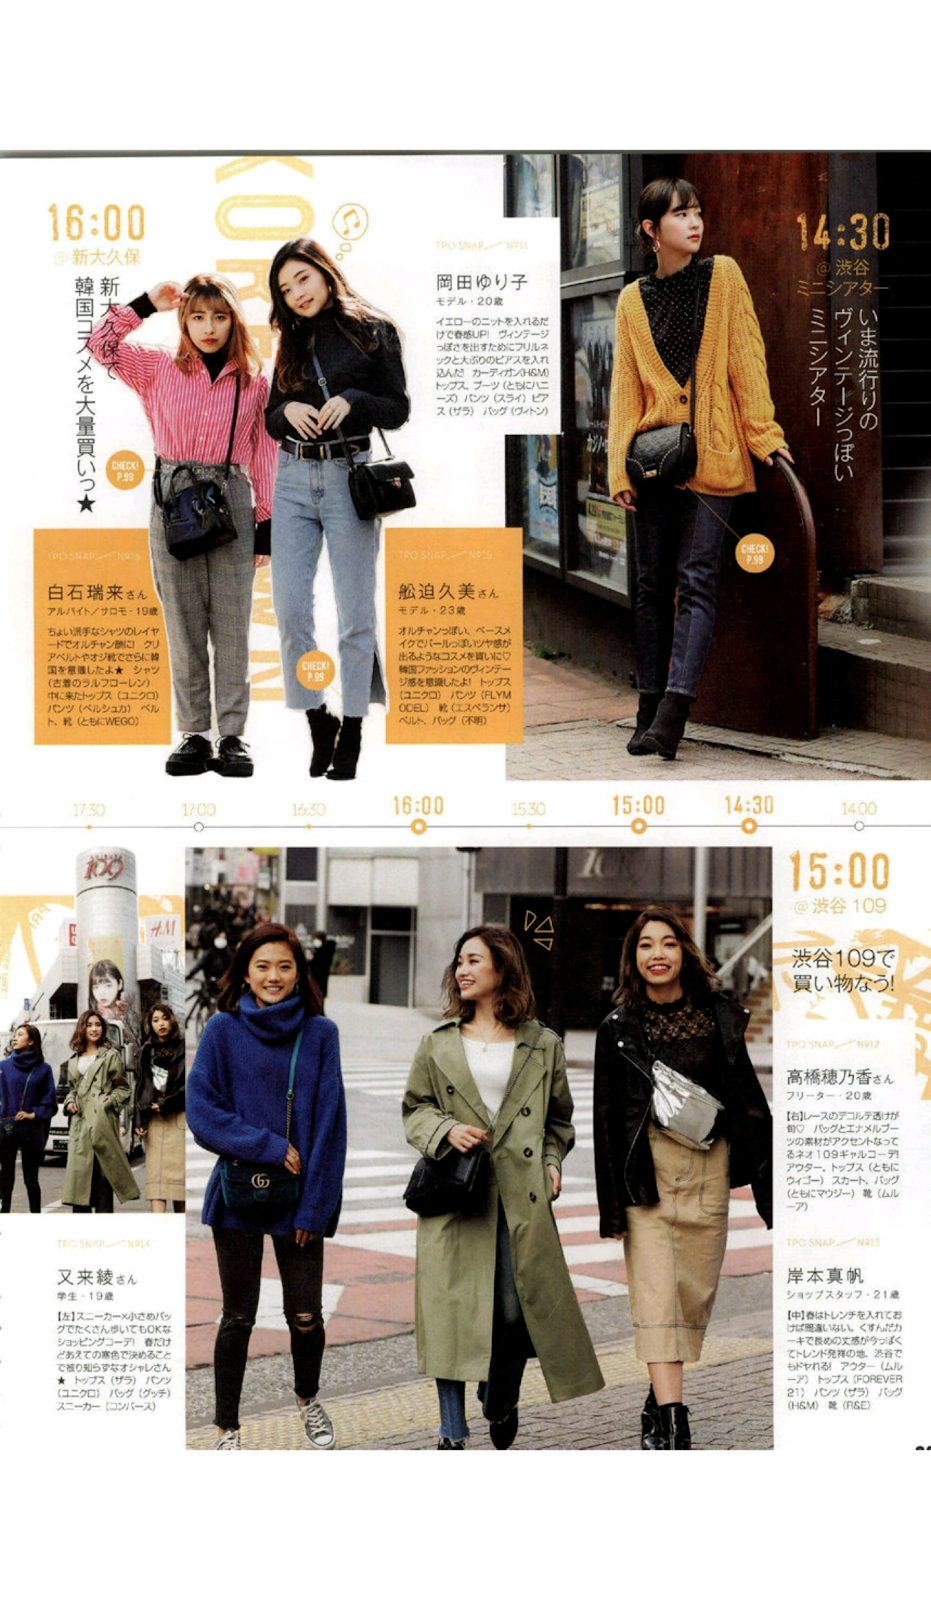 Jelly May 2018 Issue [Japanese Magazine Scans] - Beauty by Rayne